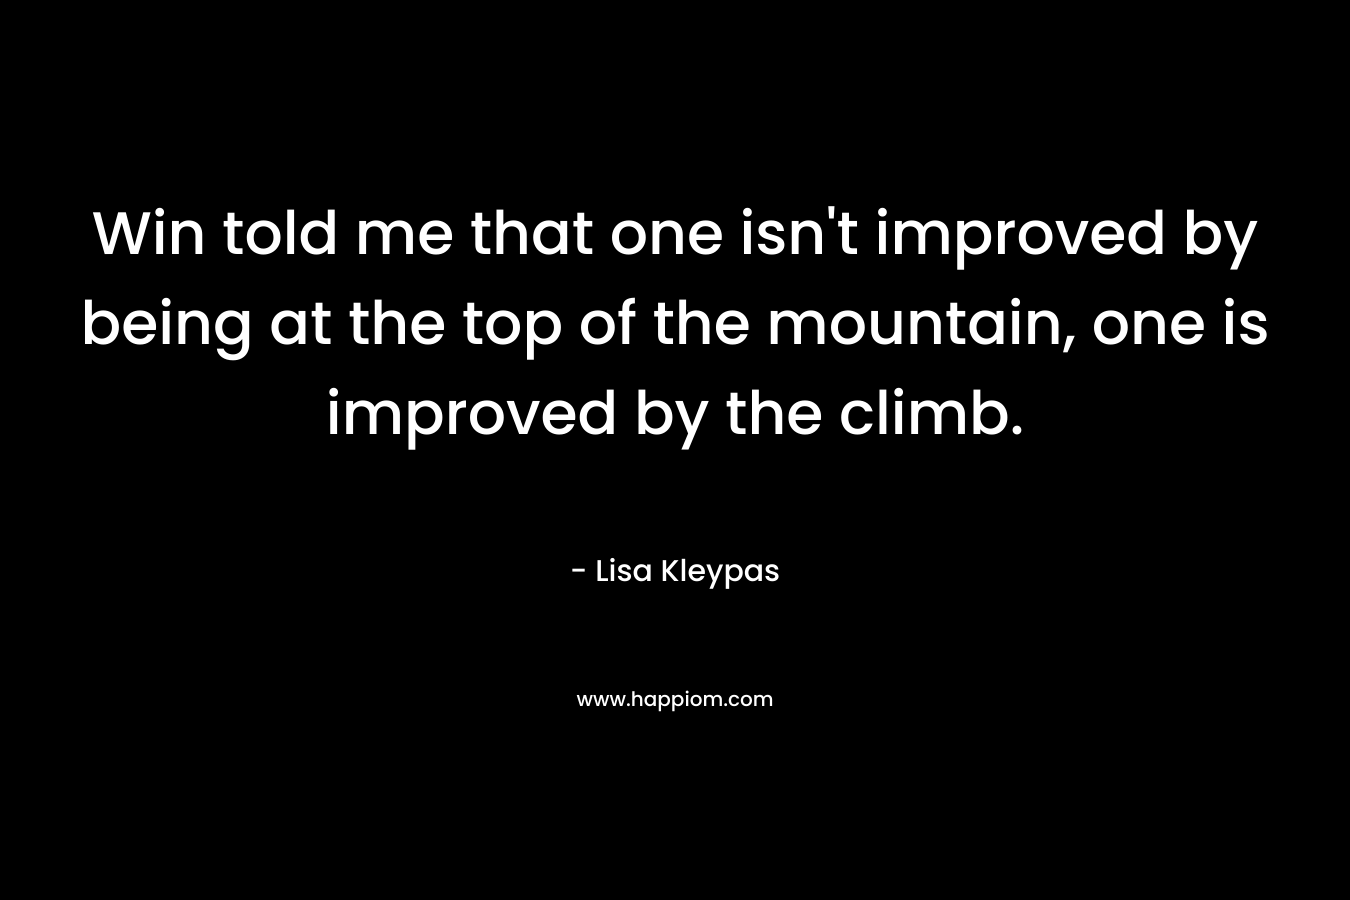 Win told me that one isn't improved by being at the top of the mountain, one is improved by the climb.